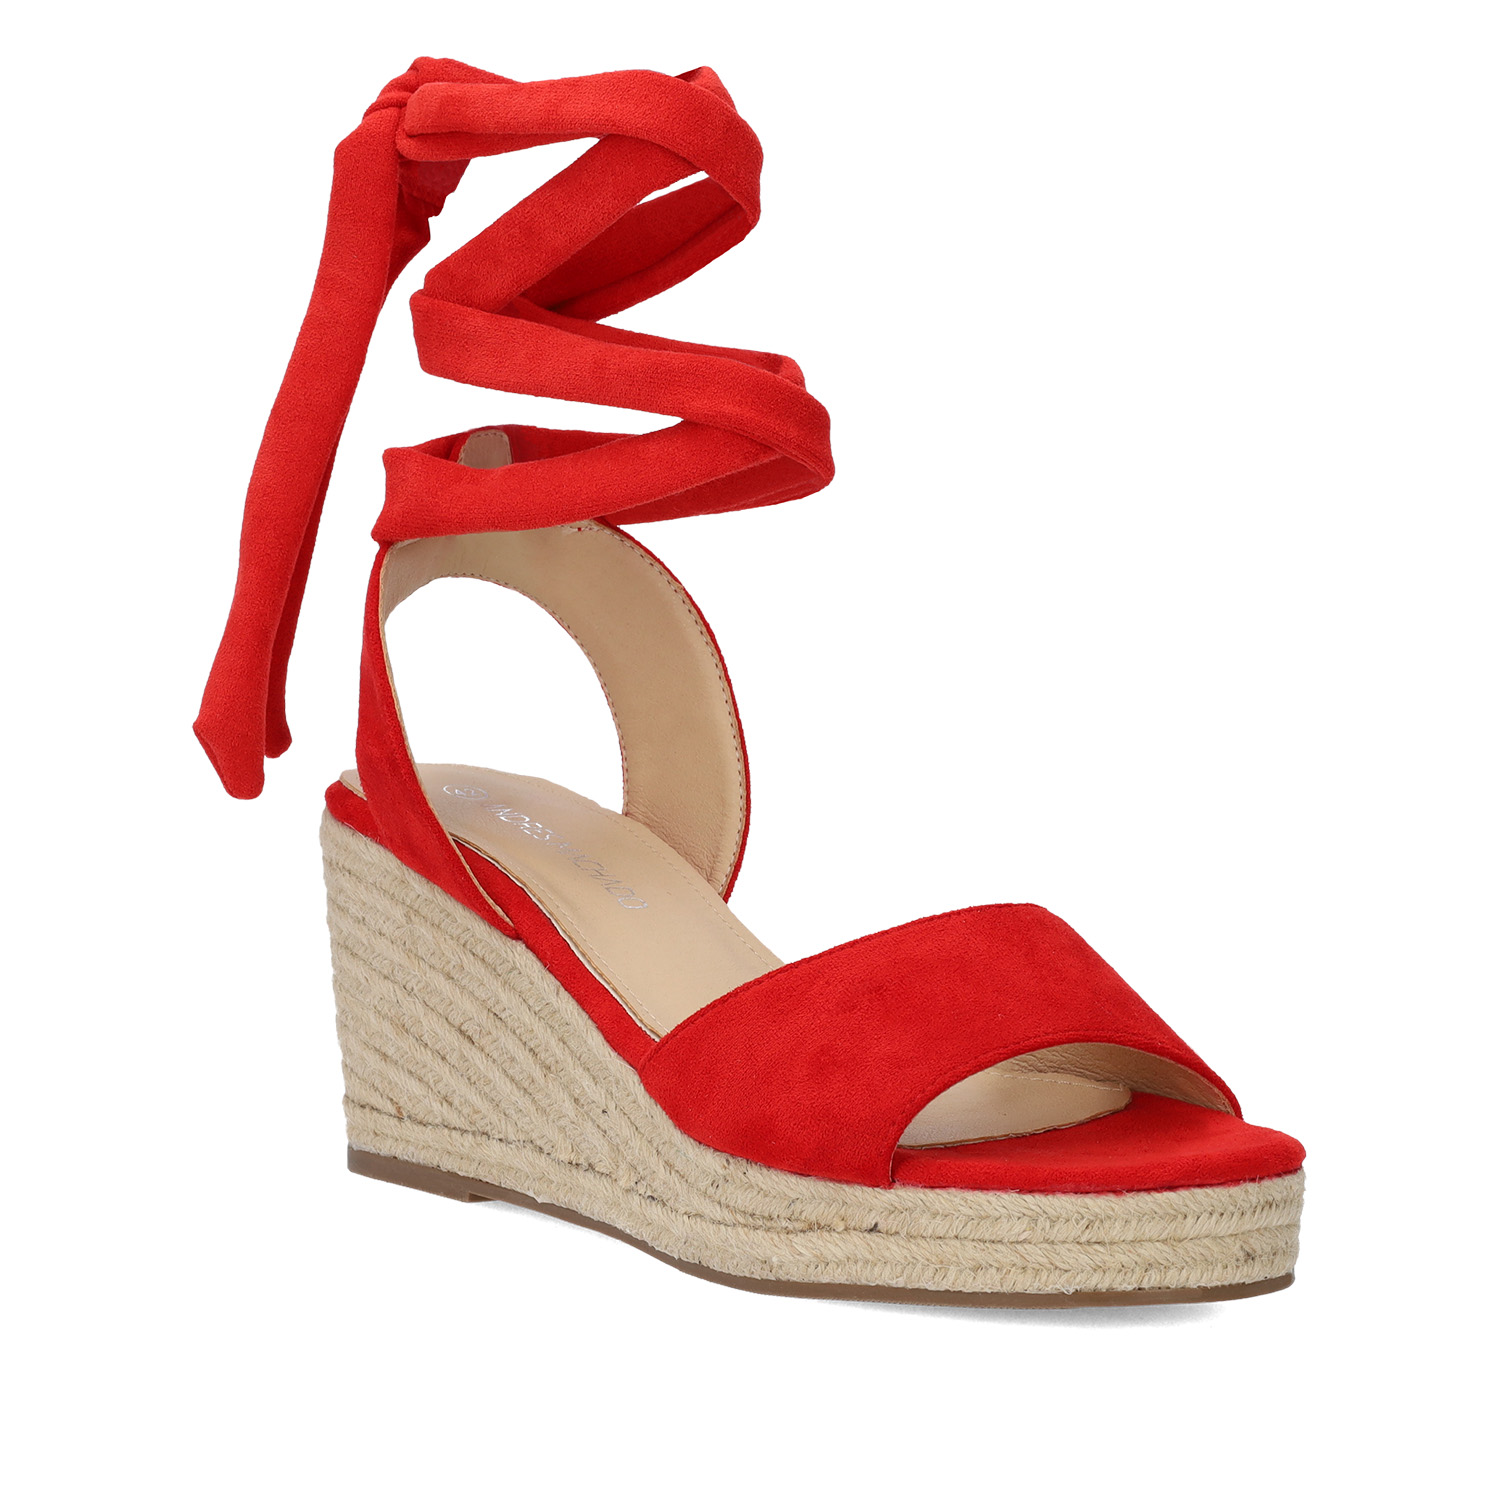 Red faux suede espadrilles with jute wedge 